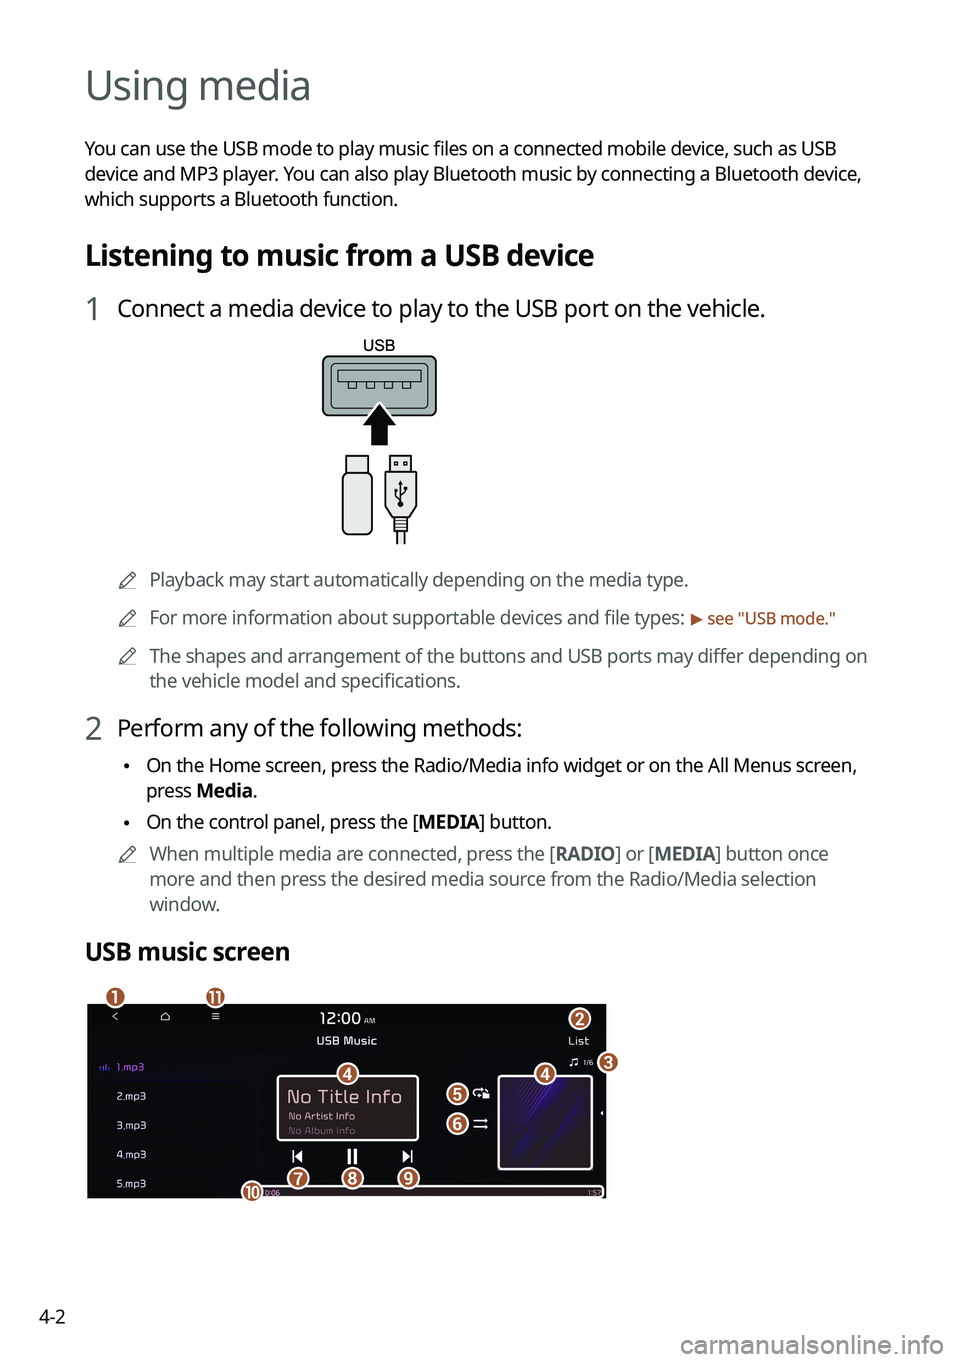 KIA SELTOS 2022  Navigation System Quick Reference Guide 4-2
Using media
You can use the USB mode to play music files on a connected mobile device, such as USB 
device and MP3 player. You can also play Bluetooth music by connecting a Bluetooth device, 
whic